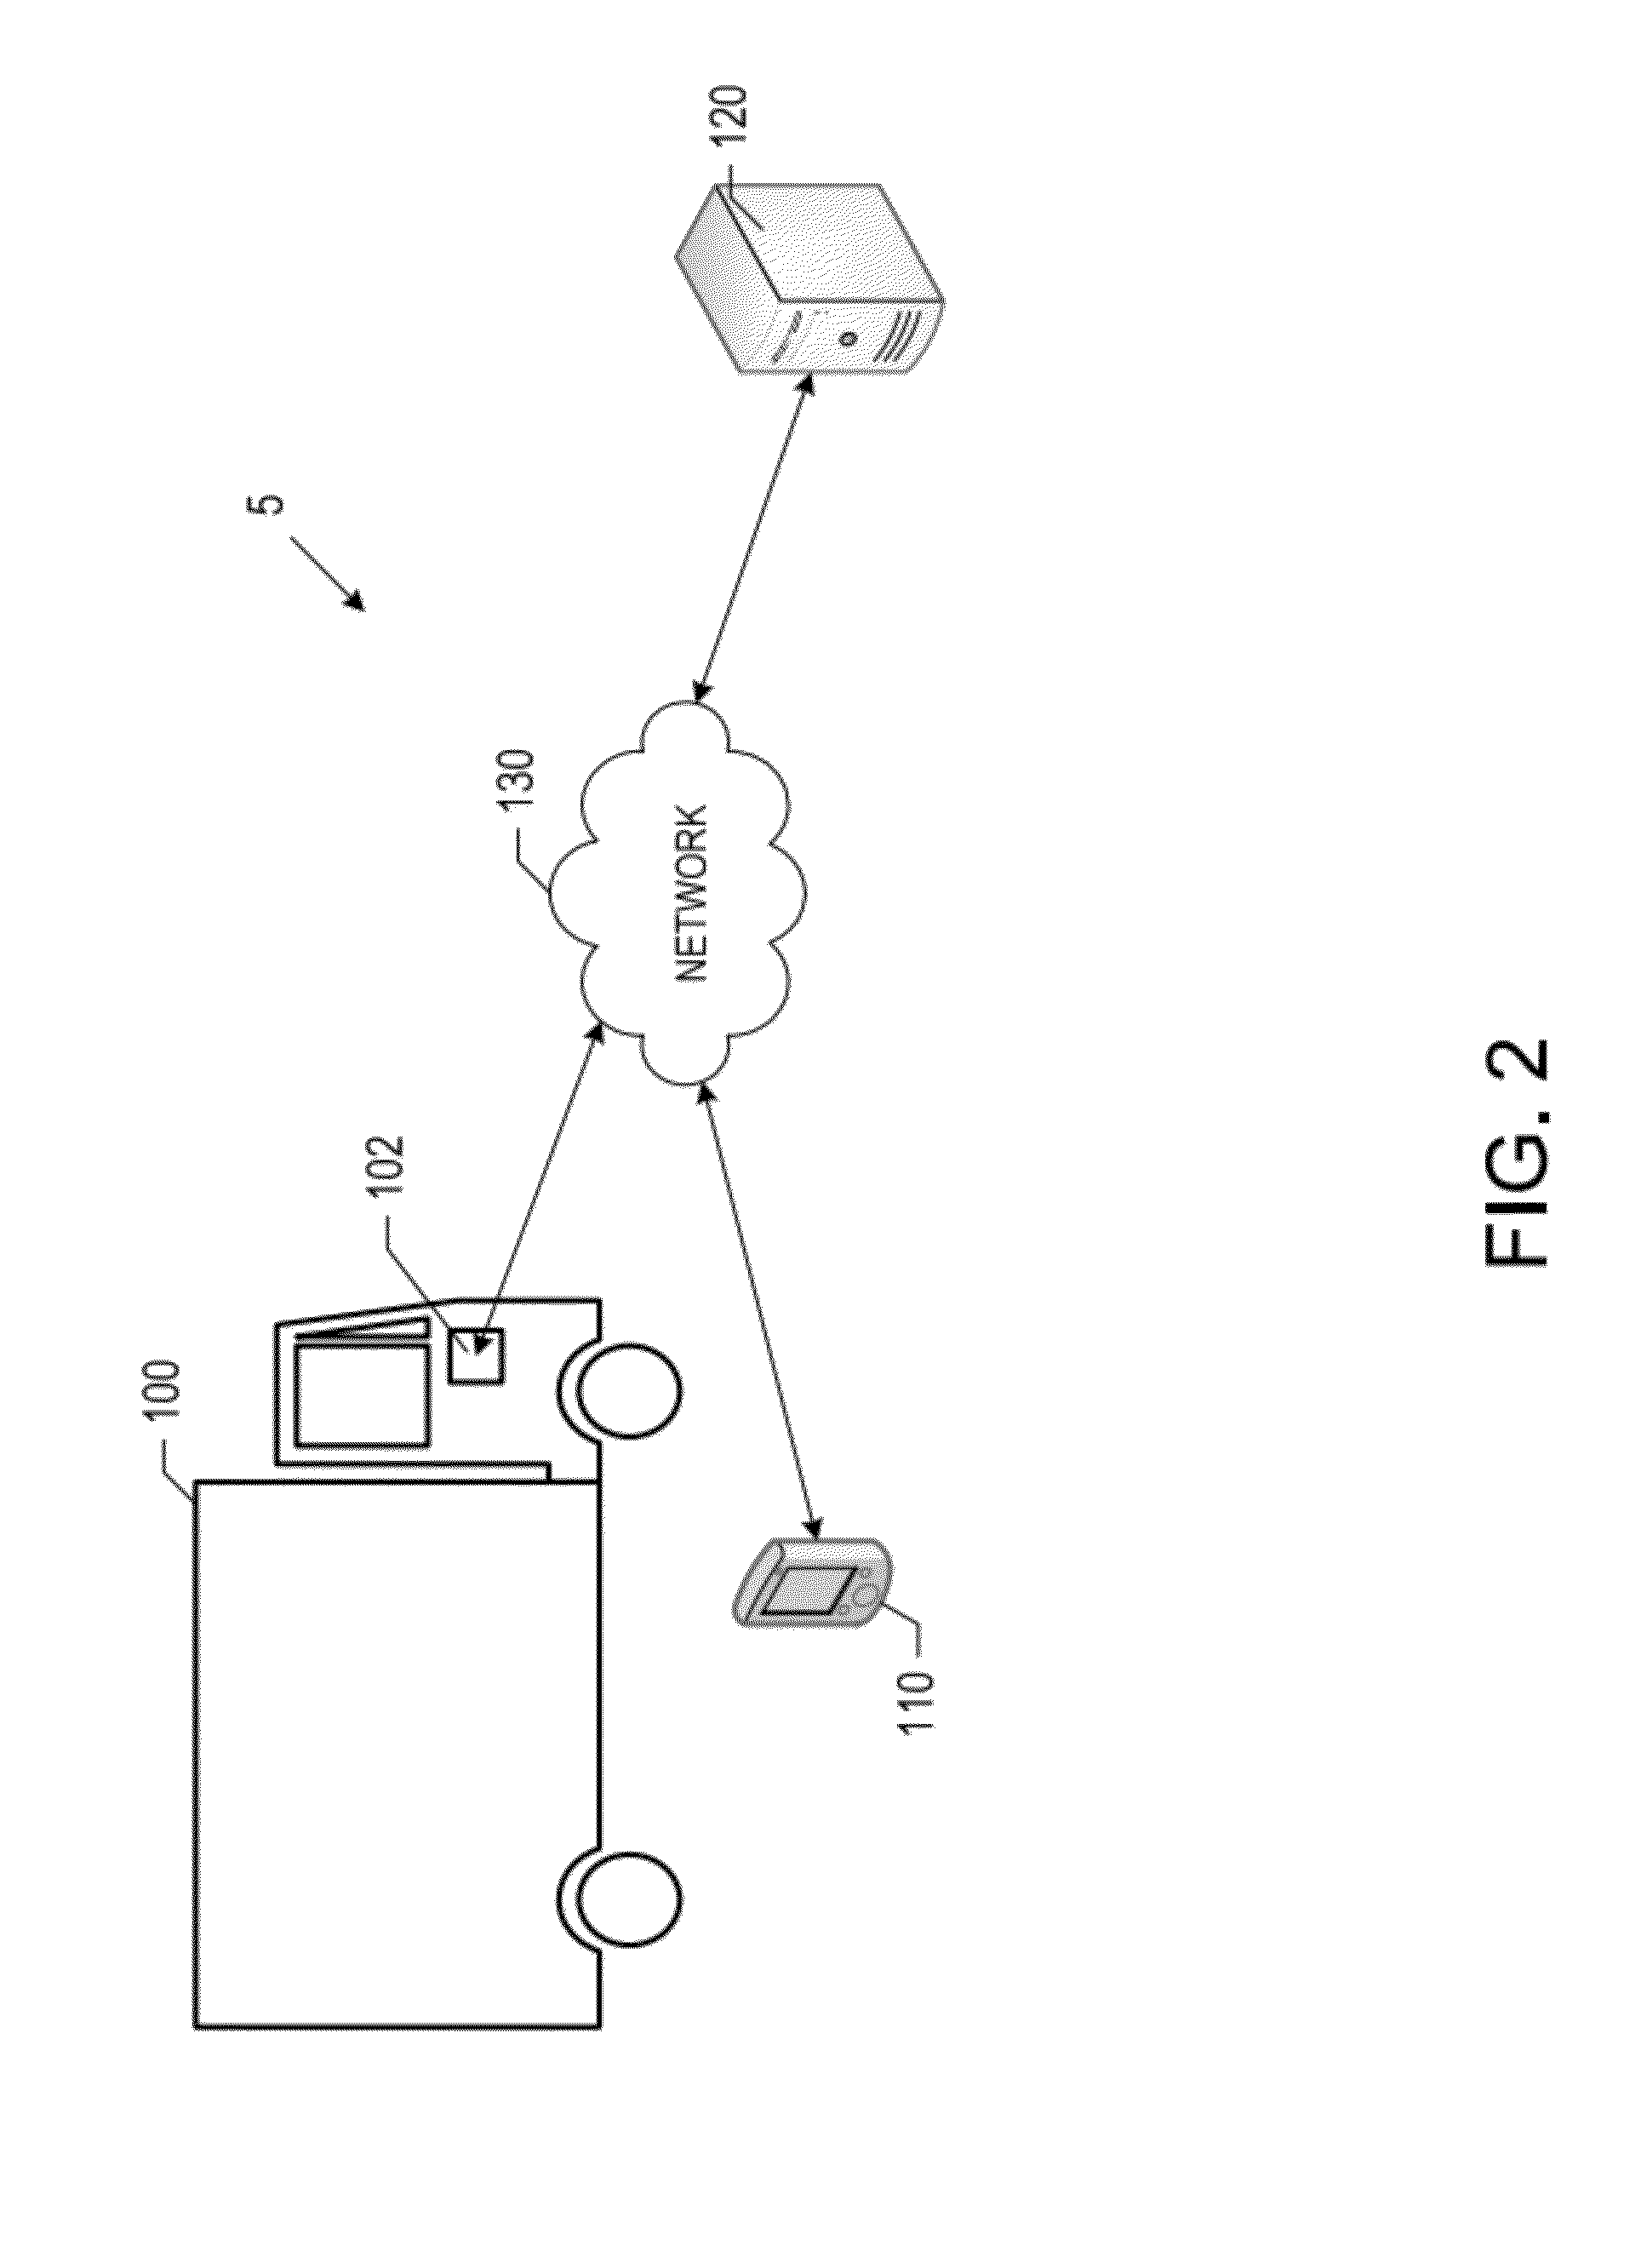 Systems and methods for segmenting operational data